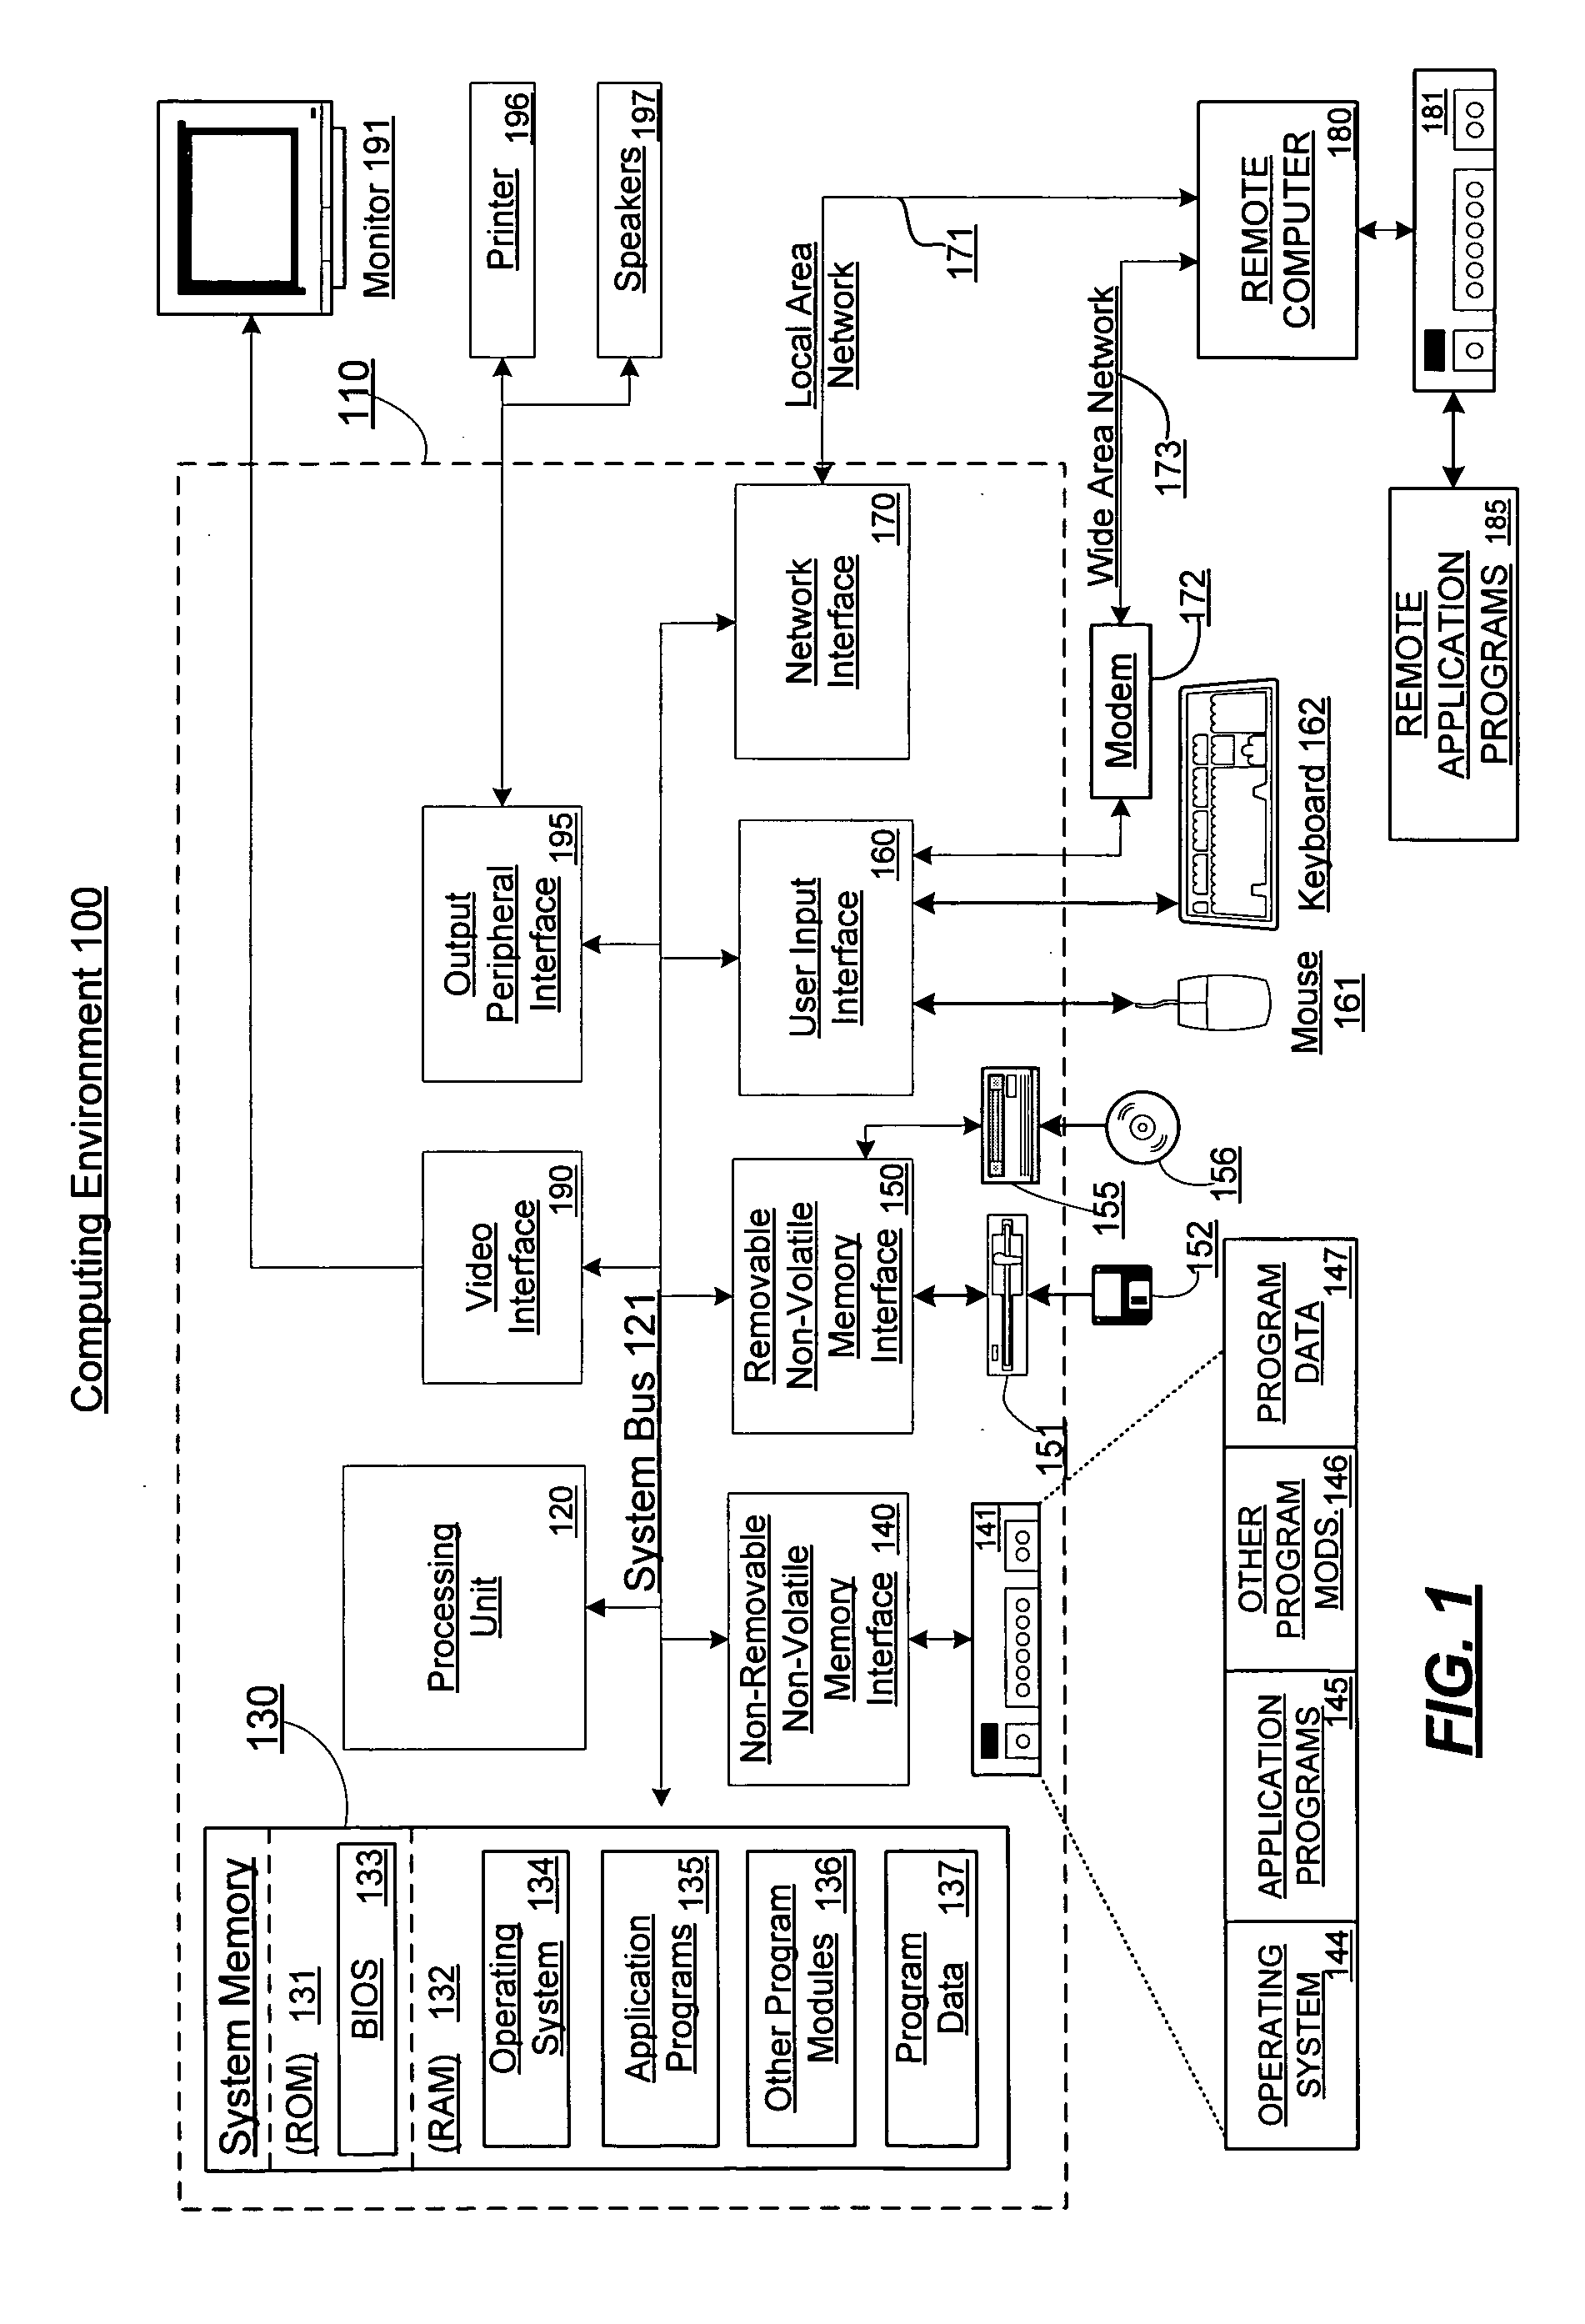 Portion-level in-memory module authentication